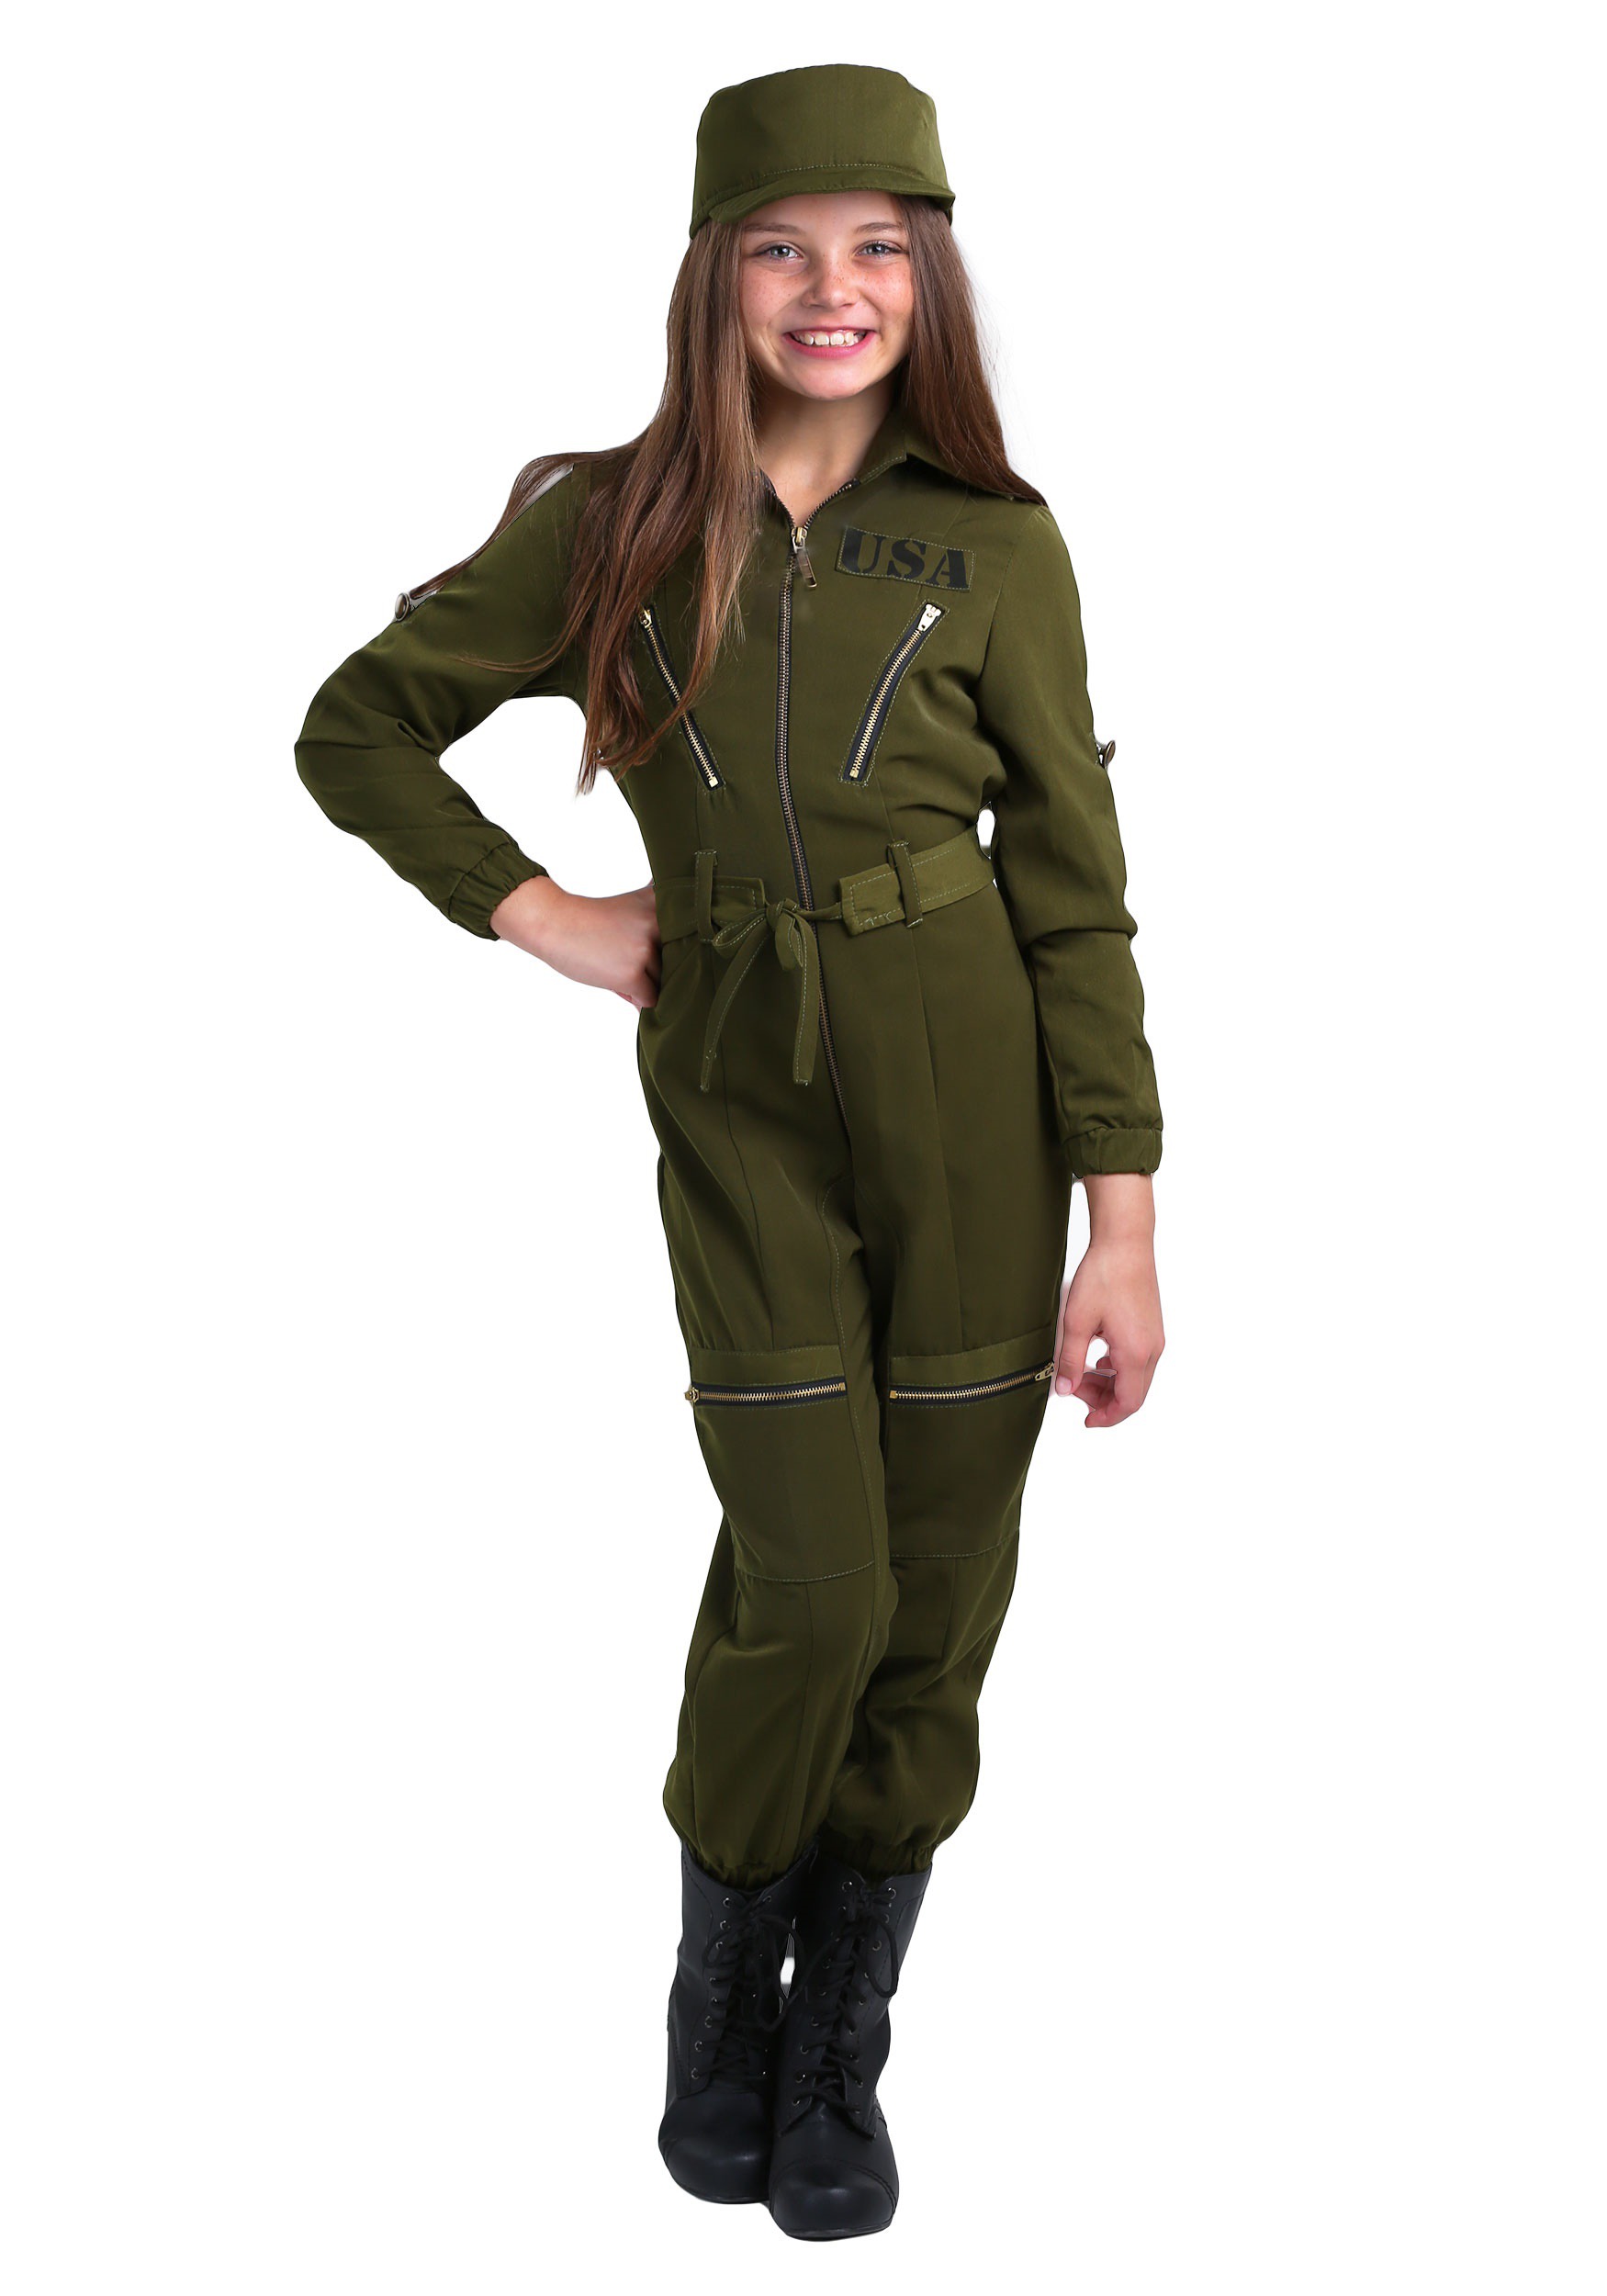 Army Flightsuit Costume for Girls | Uniform Costumes